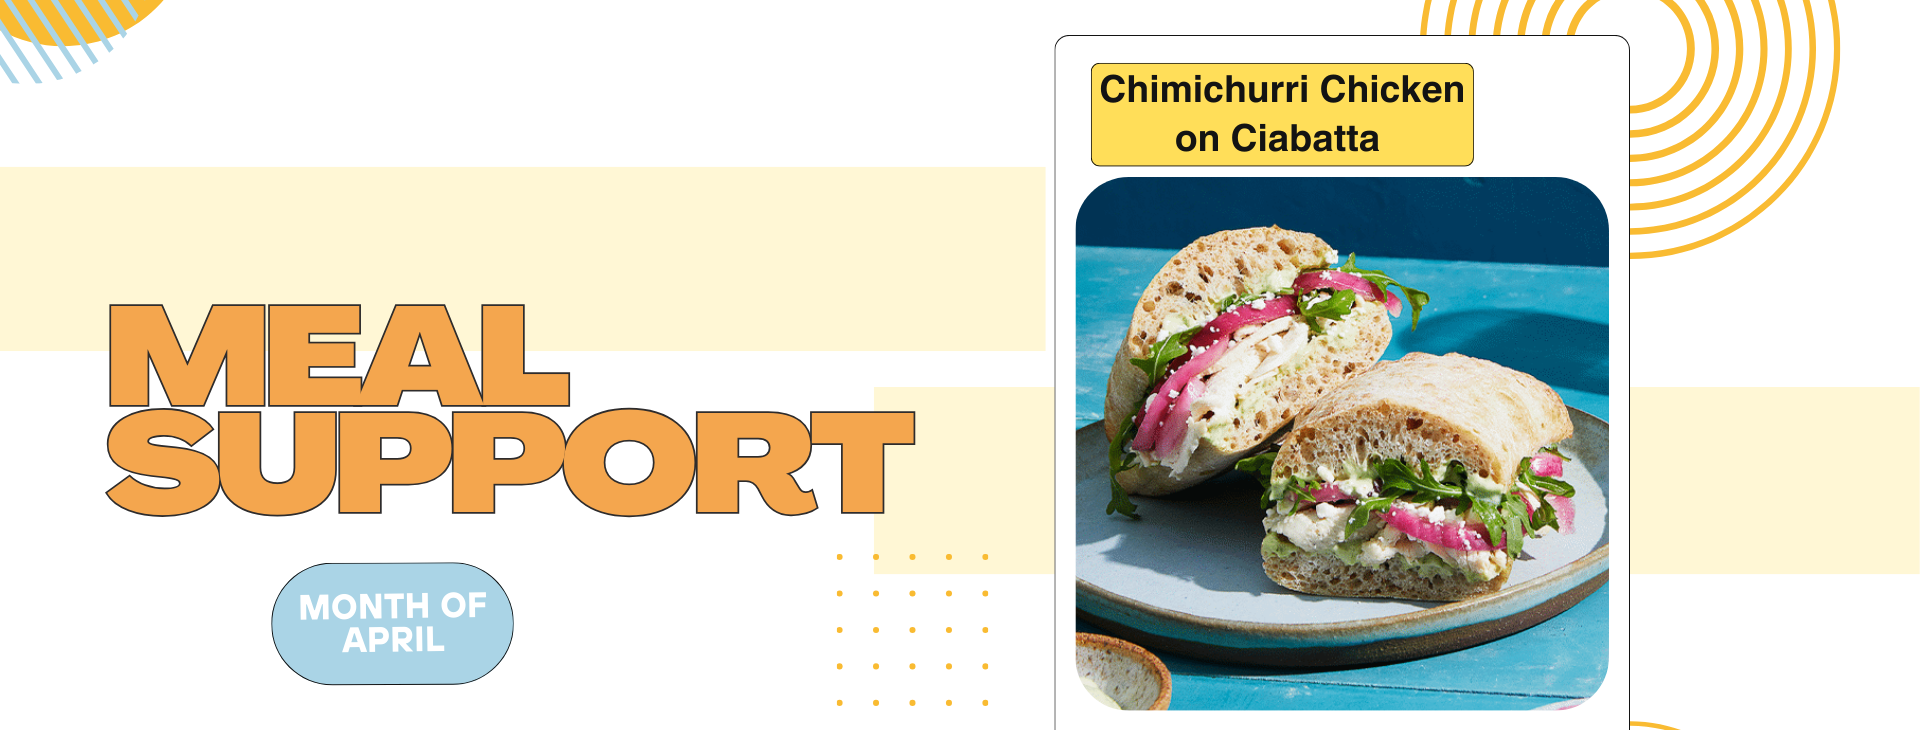 Meal Support- Chimichurri Sandwich